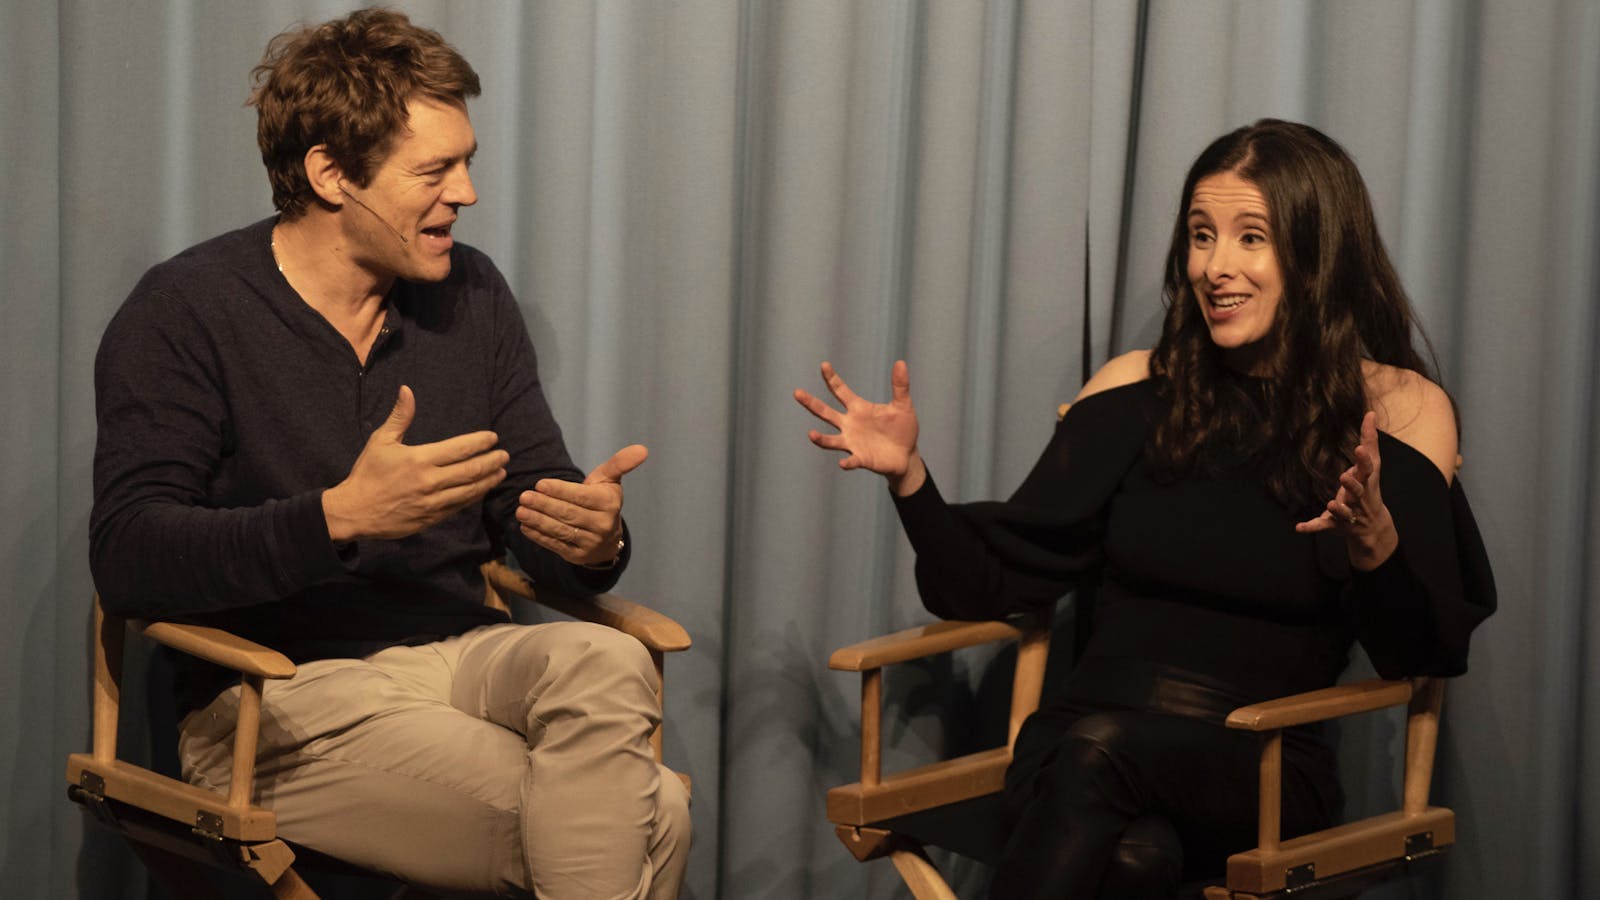 Hollywood producer Jason Blum with The Information's Jessica Lessin on Tuesday night. Photo by Erin Beach.